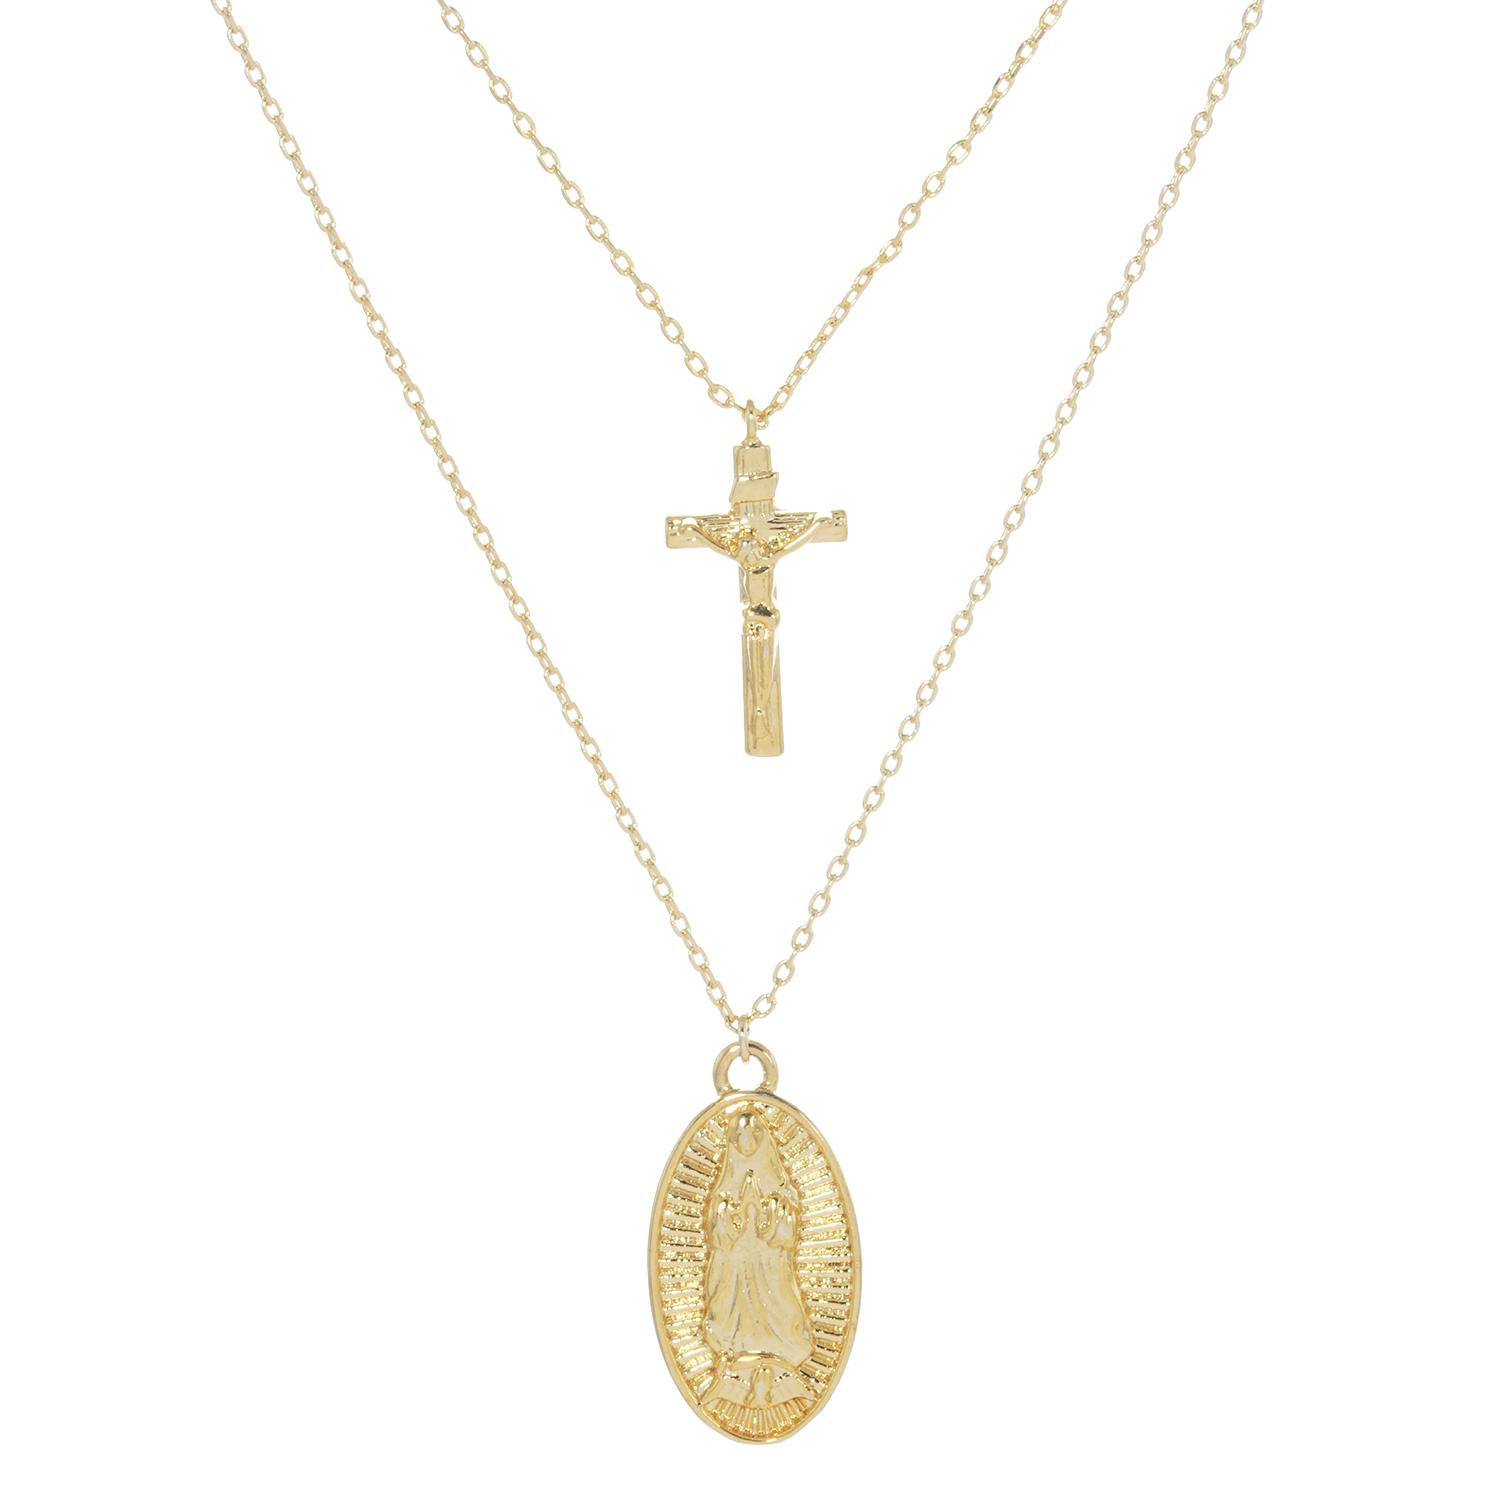 GOLD DIPPED CROSS PENDANT LAYERED NECKLACE